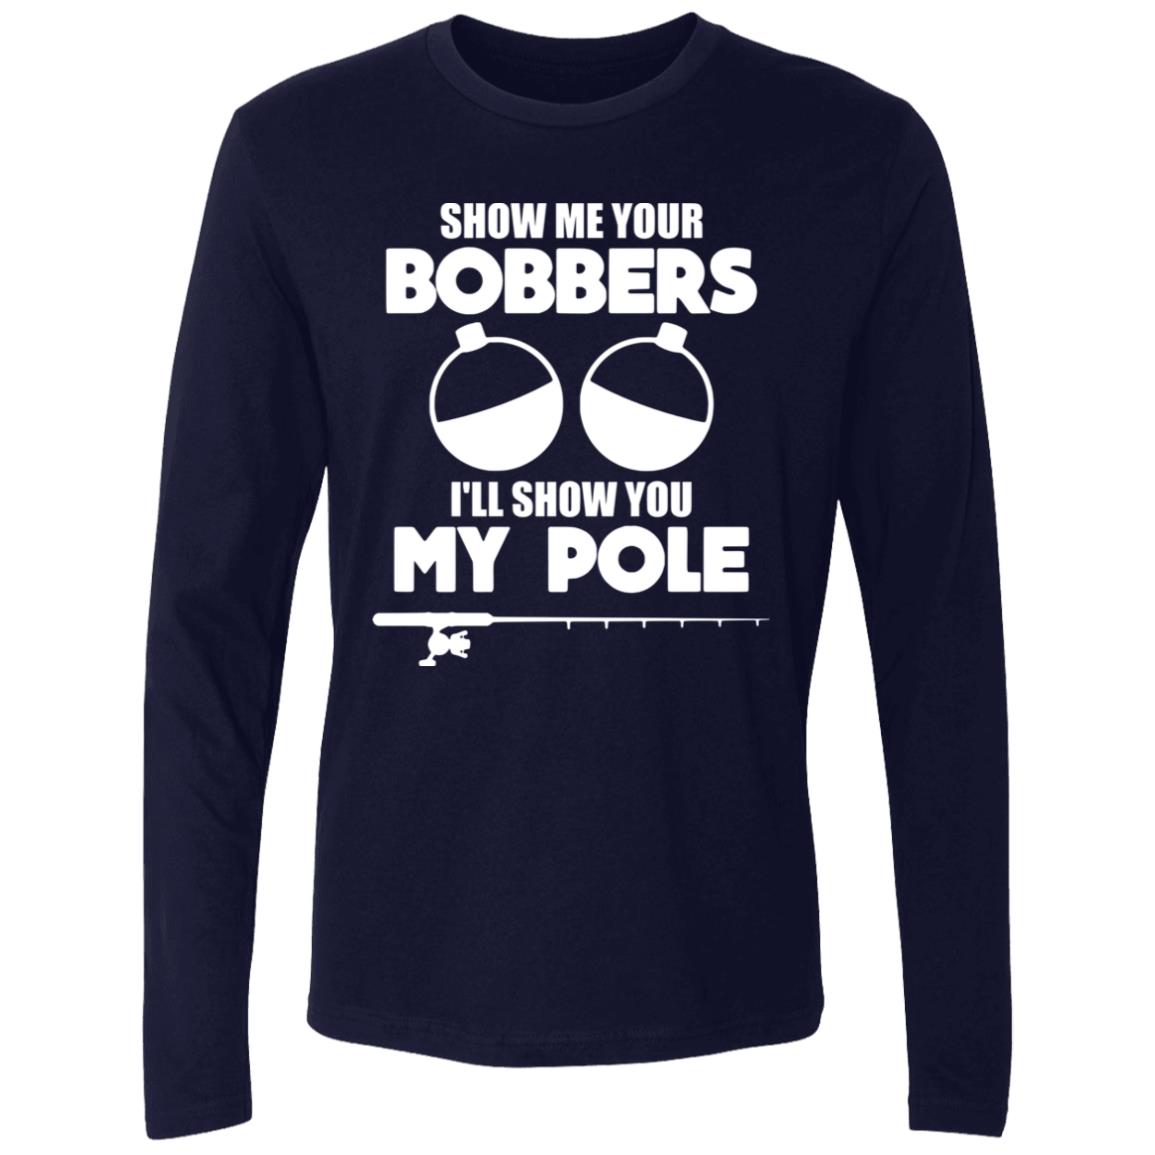 HRCL FL - Show Me Your Bobbers I'll Show You My Pole - 2 Sided NL3601 Men's Premium LS